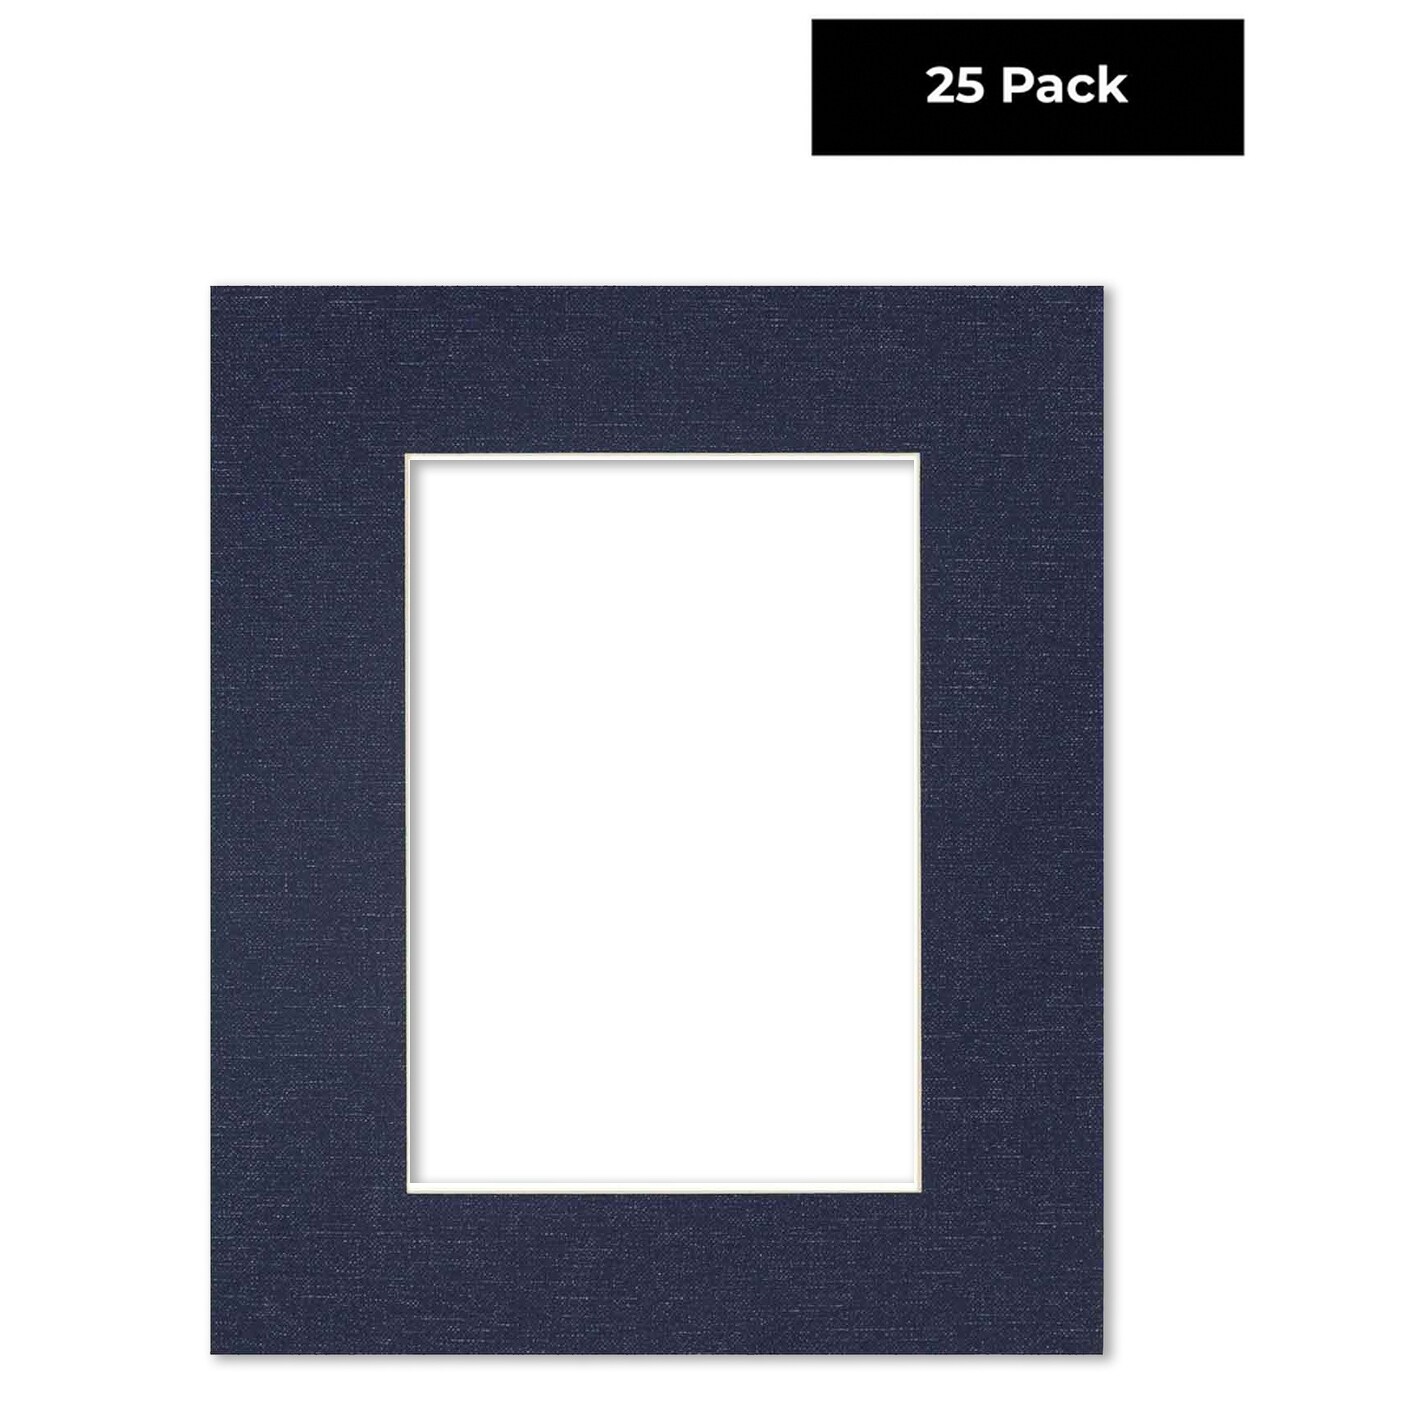 Pack of 25 Acid Free 8x10 Mats Bevel Cut for 5x7 Photos - White